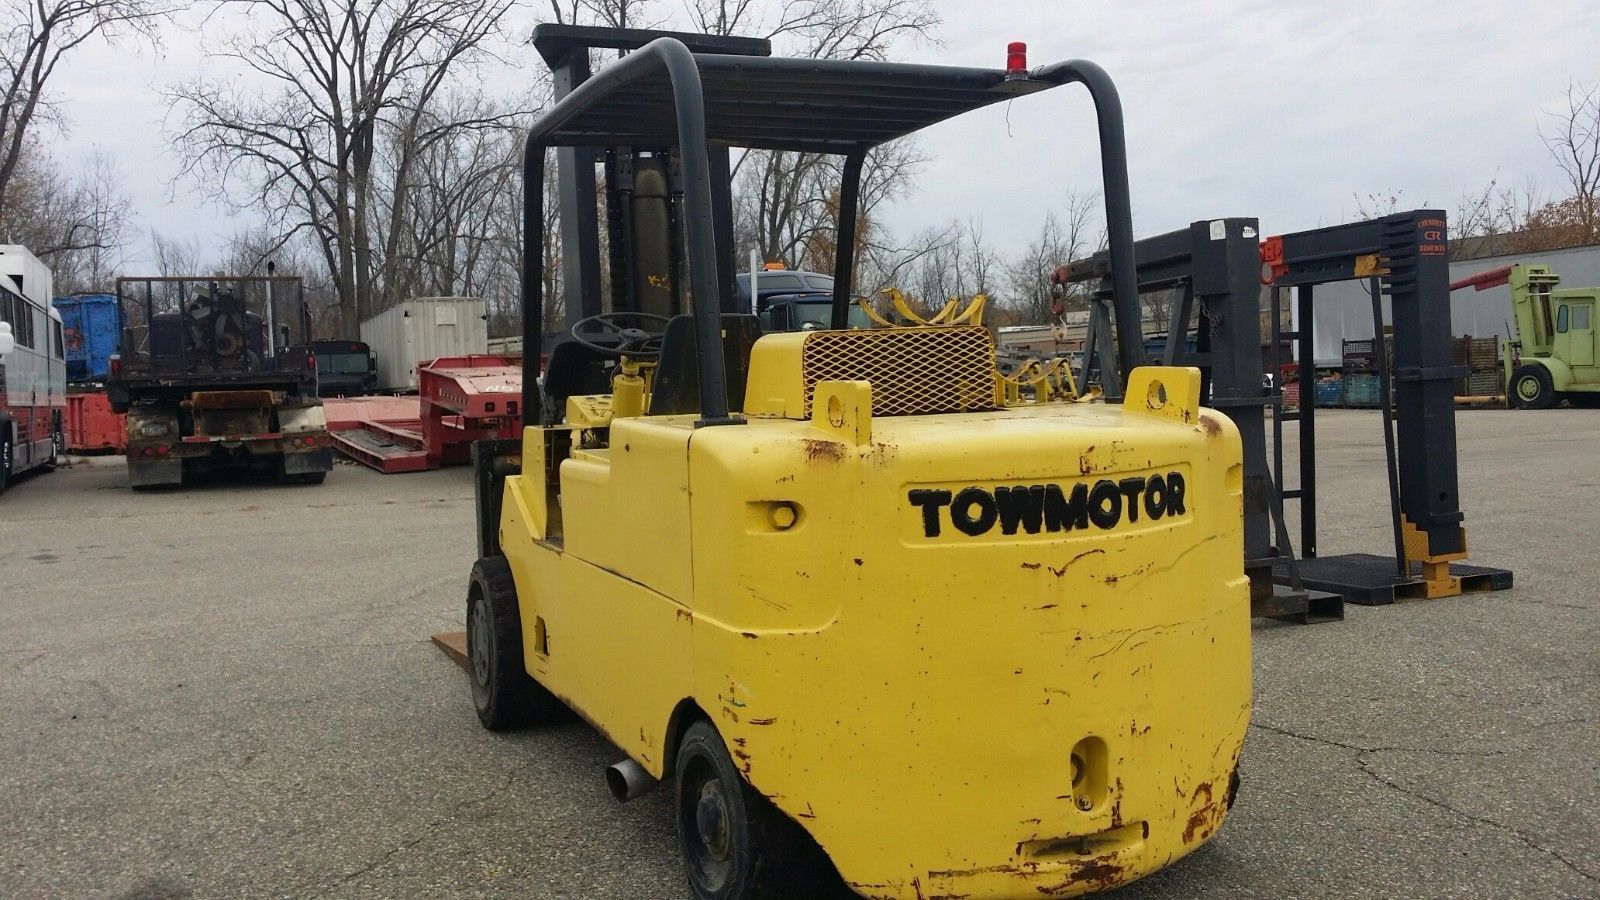 25,000lb. Capacity Cat/Towmotor Forklift For Sale